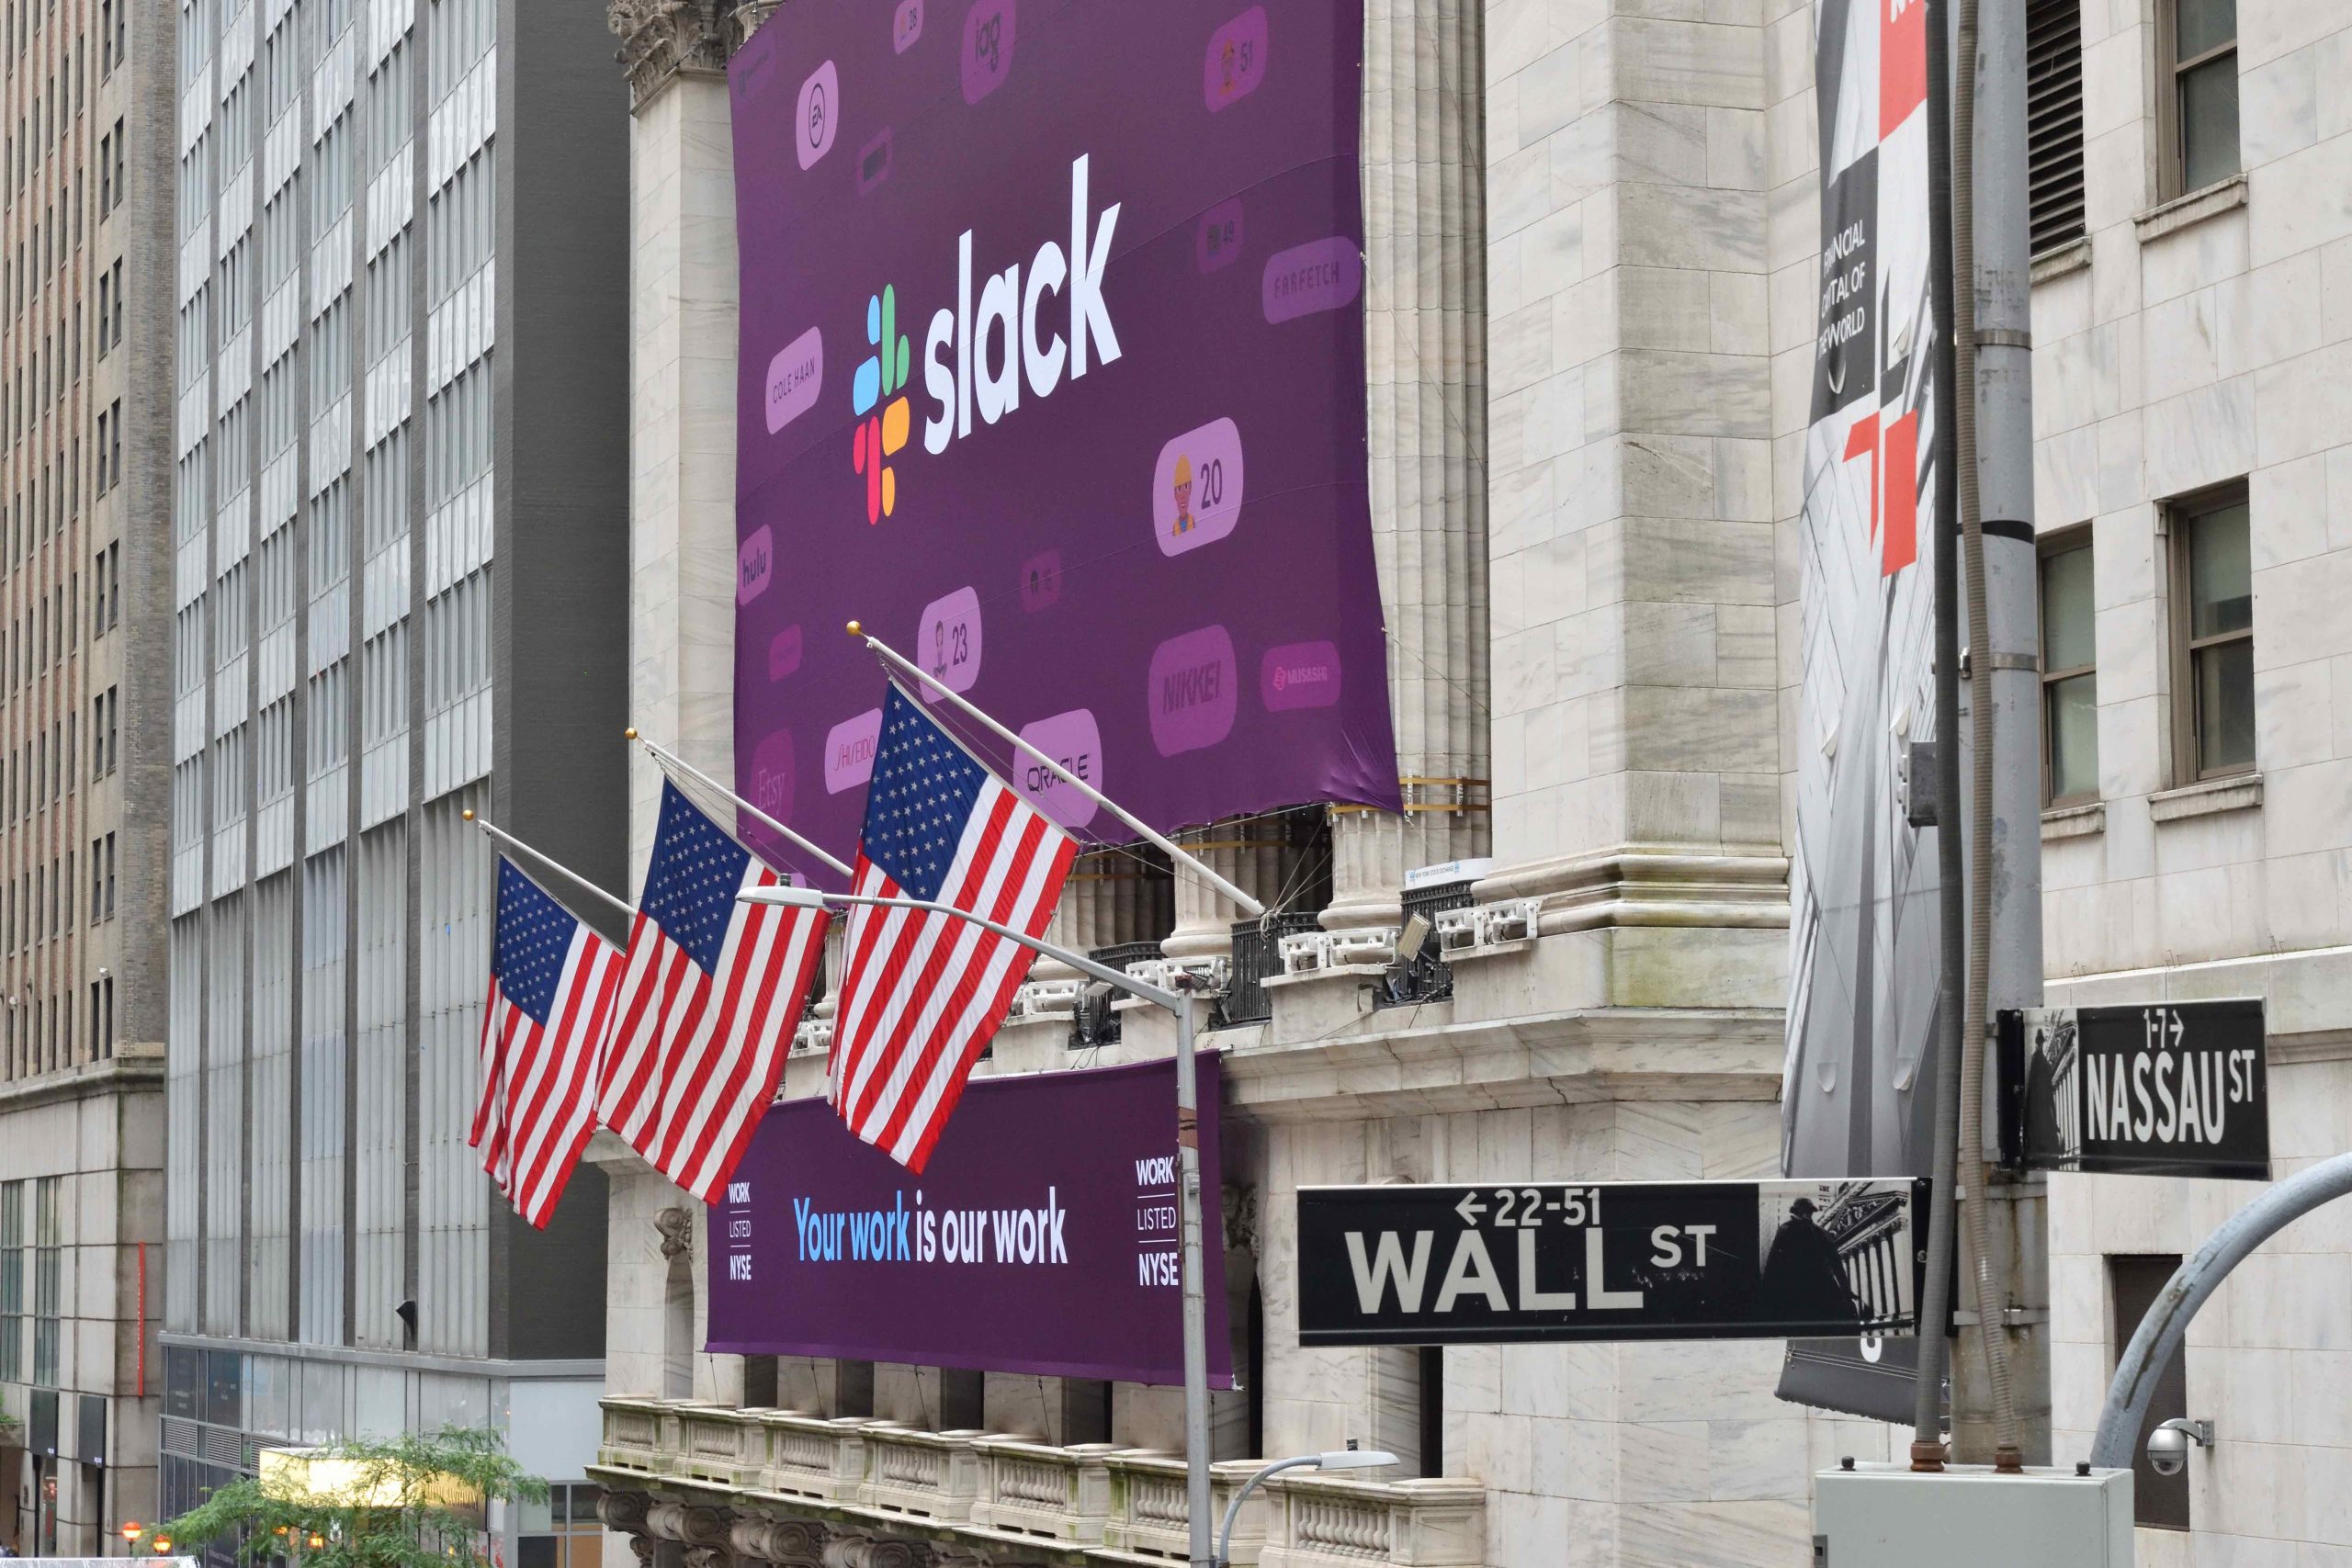 A large banner with the Slack company logo hangs on a marble building with American flags in the front.